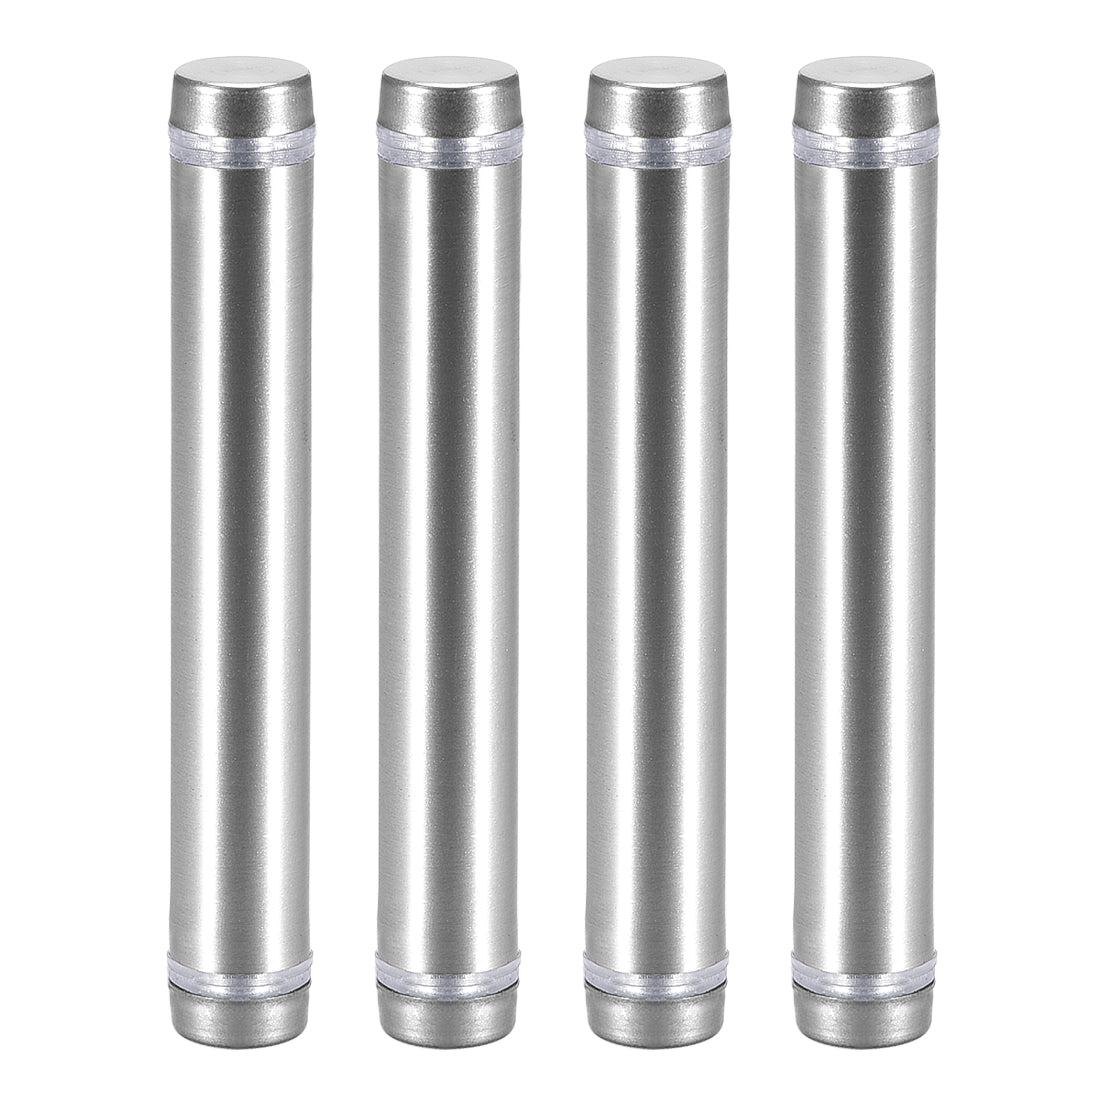 uxcell Uxcell Glass Standoff Double Head Stainless Steel Standoff Holder 12mm x 84mm 4 Pcs